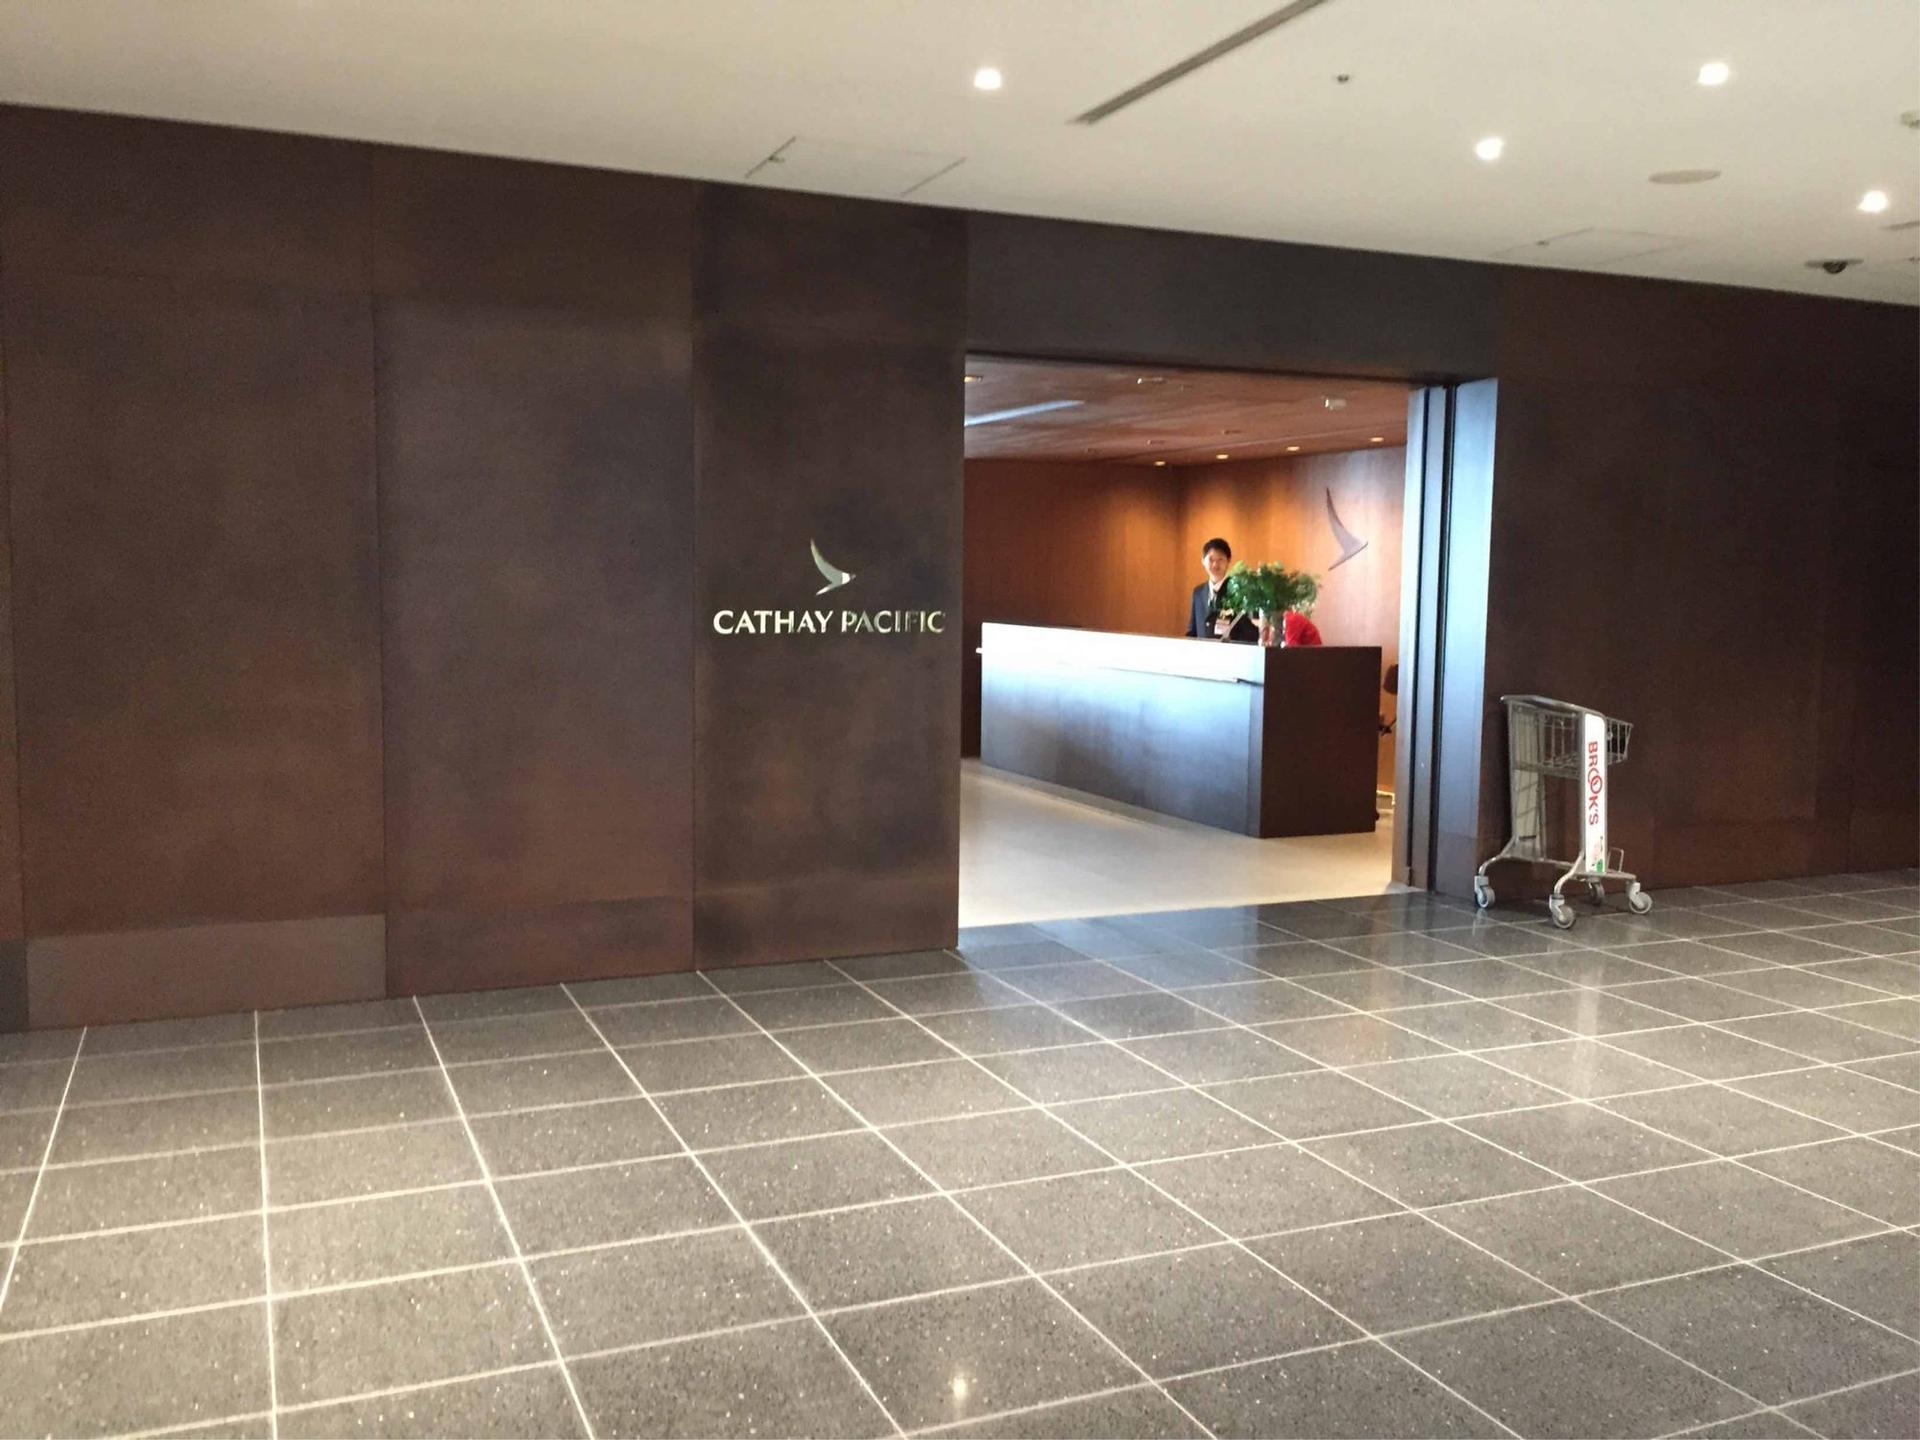 Cathay Pacific Lounge image 35 of 49